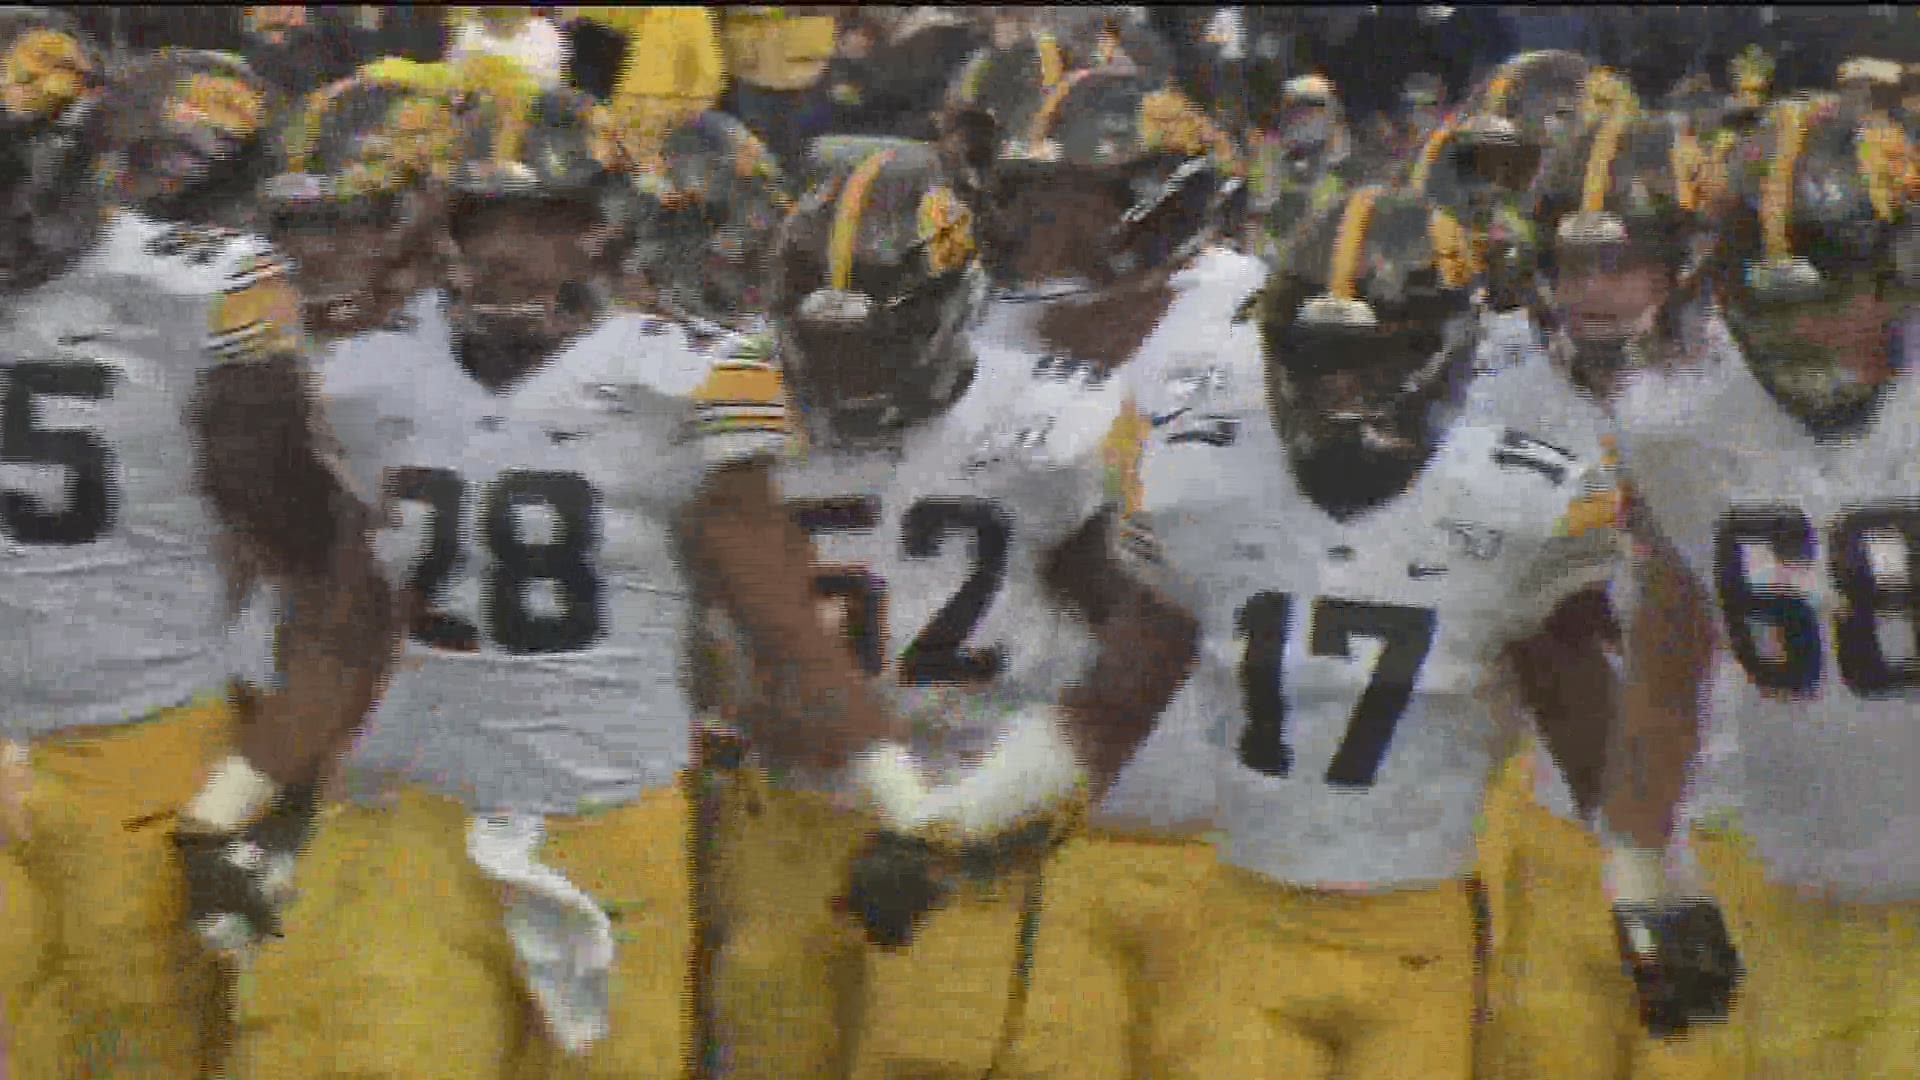 Iowa Football lays out their plan for changing the culture of the program. Former players speak up about racial injustices.